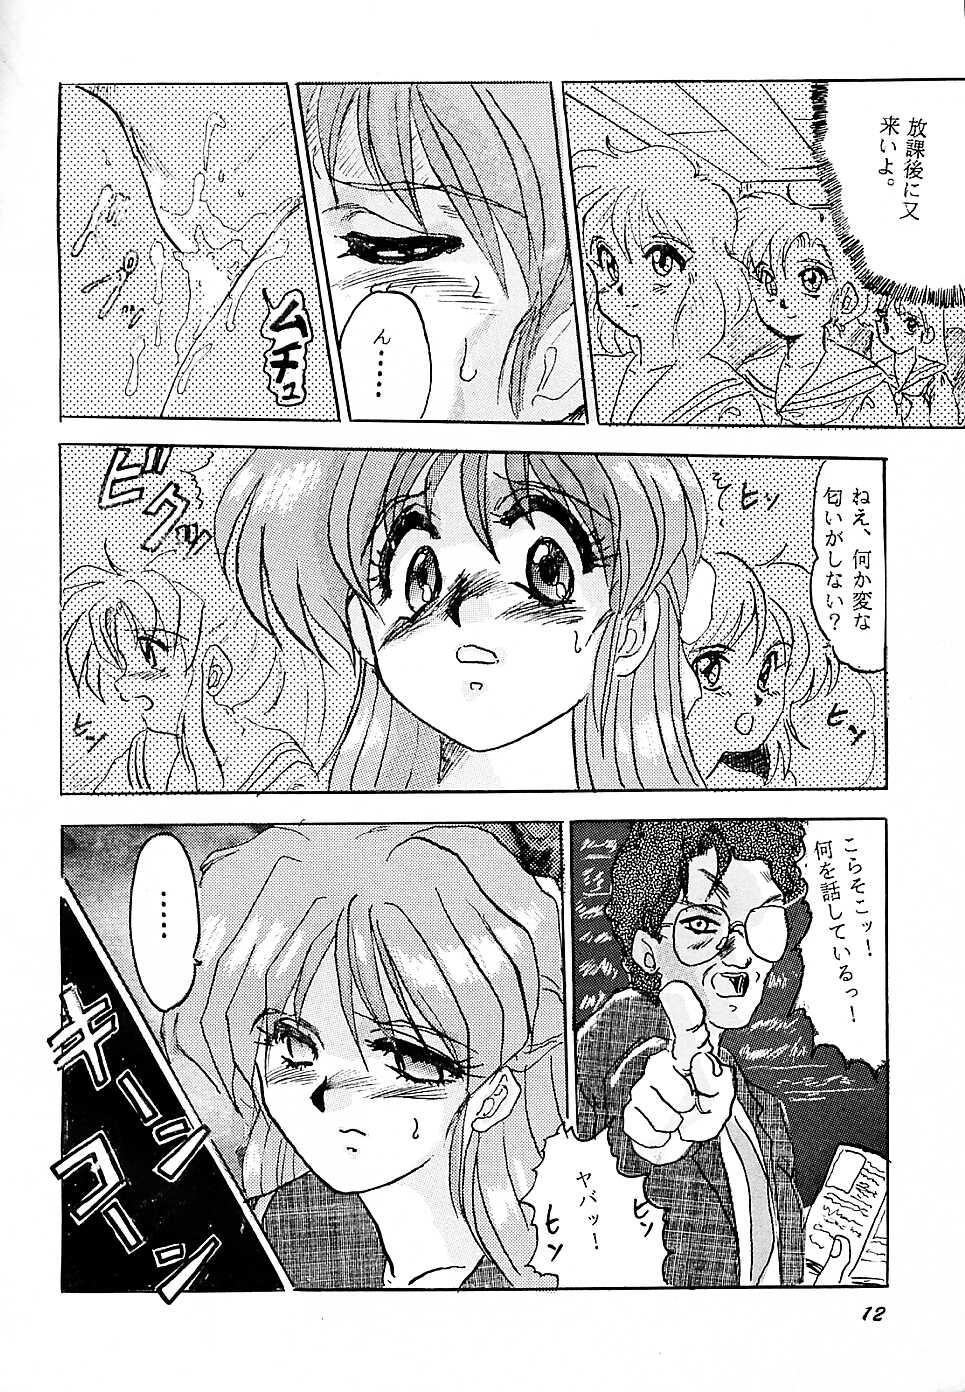 Curves F 93C - Brave express might gaine Heels - Page 11